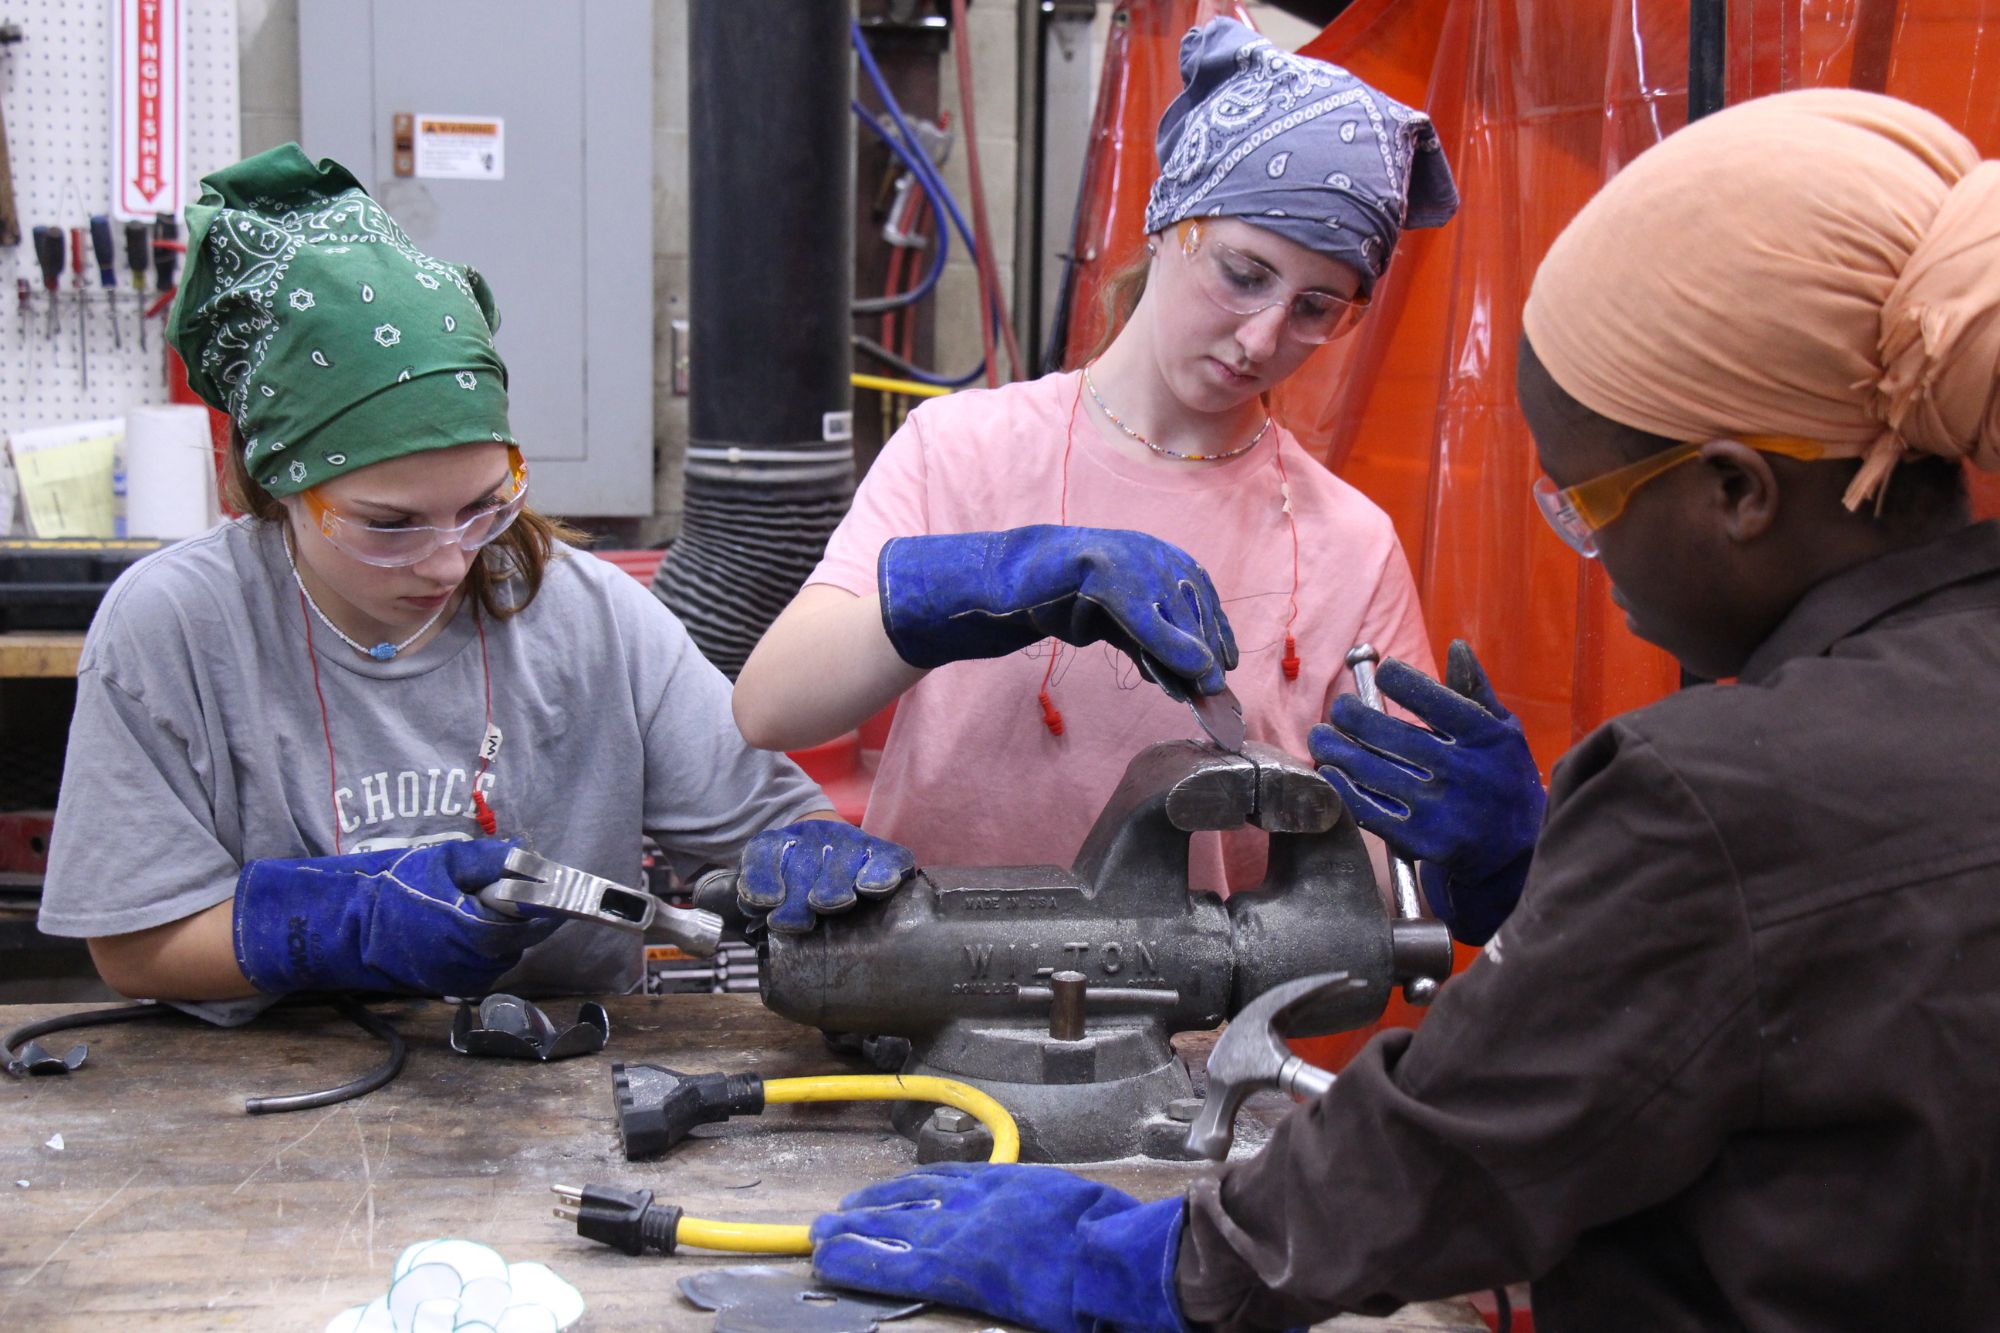 LIFT participants use hammers to shape metal pieces.